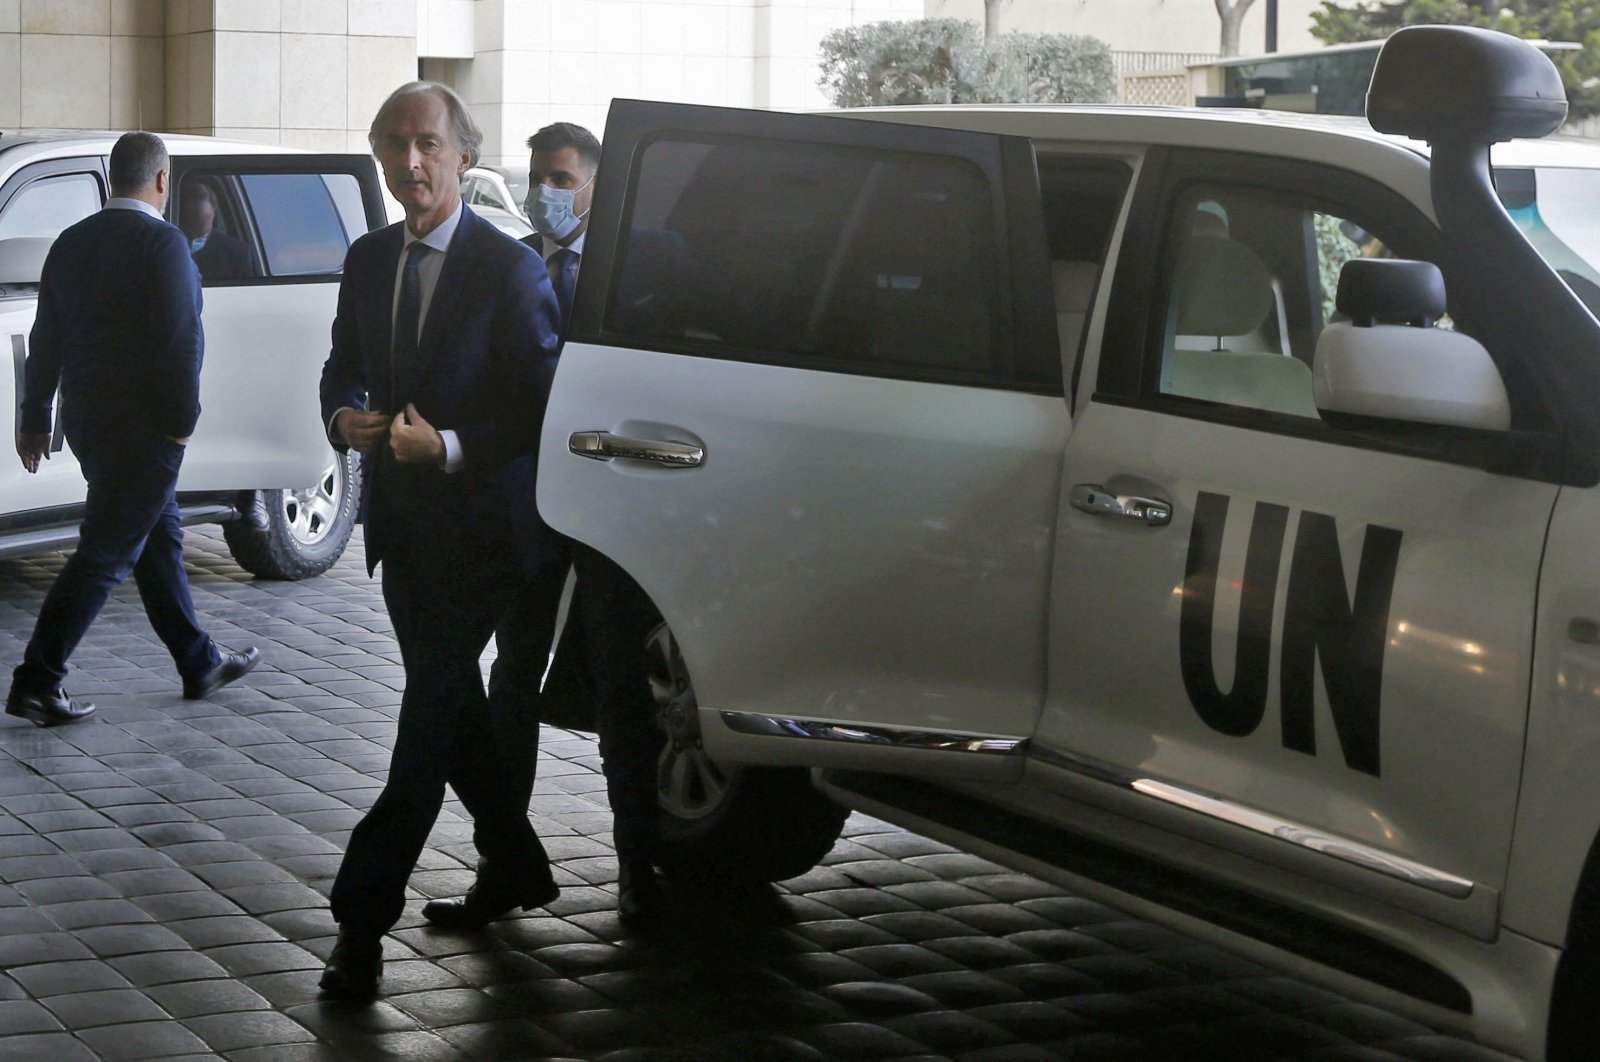 Geir Pedersen, United Nations Special Envoy for Syria, arrives at his hotel after a meeting with the Syrian foreign minister in the capital Damascus, on Feb. 16, 2022. (AFP Photo)